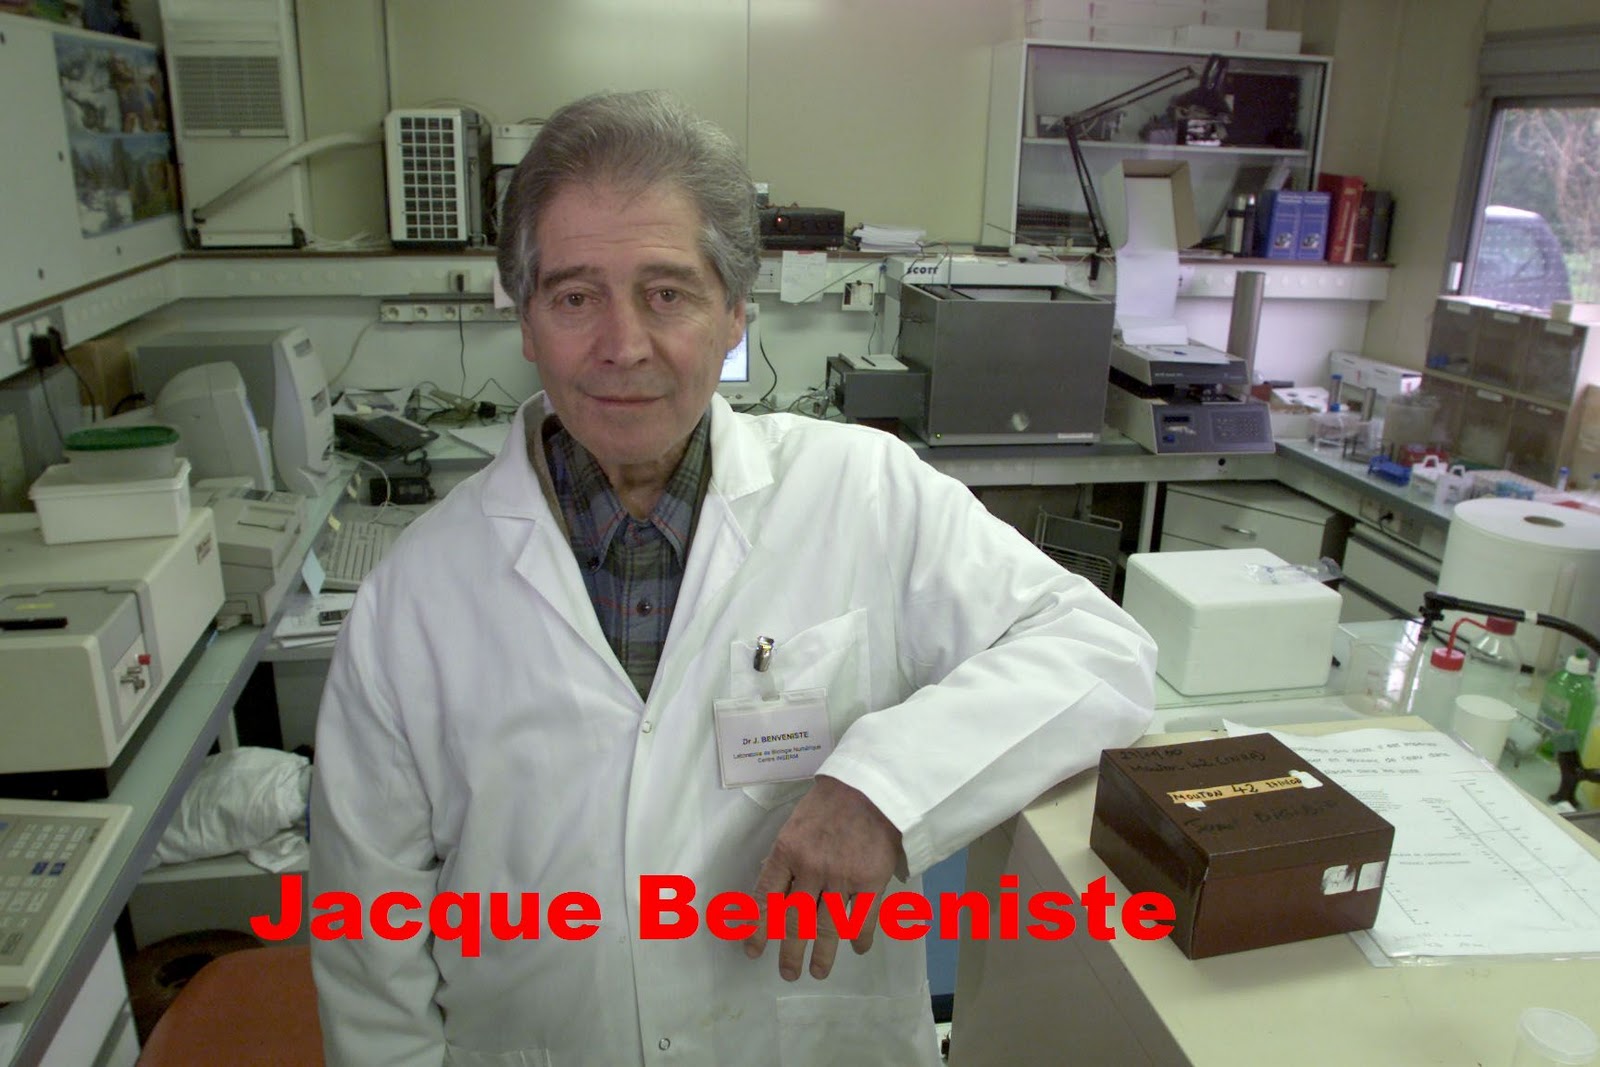 Jacques Benveniste claimed he could explain homeopathy in the eighties ...